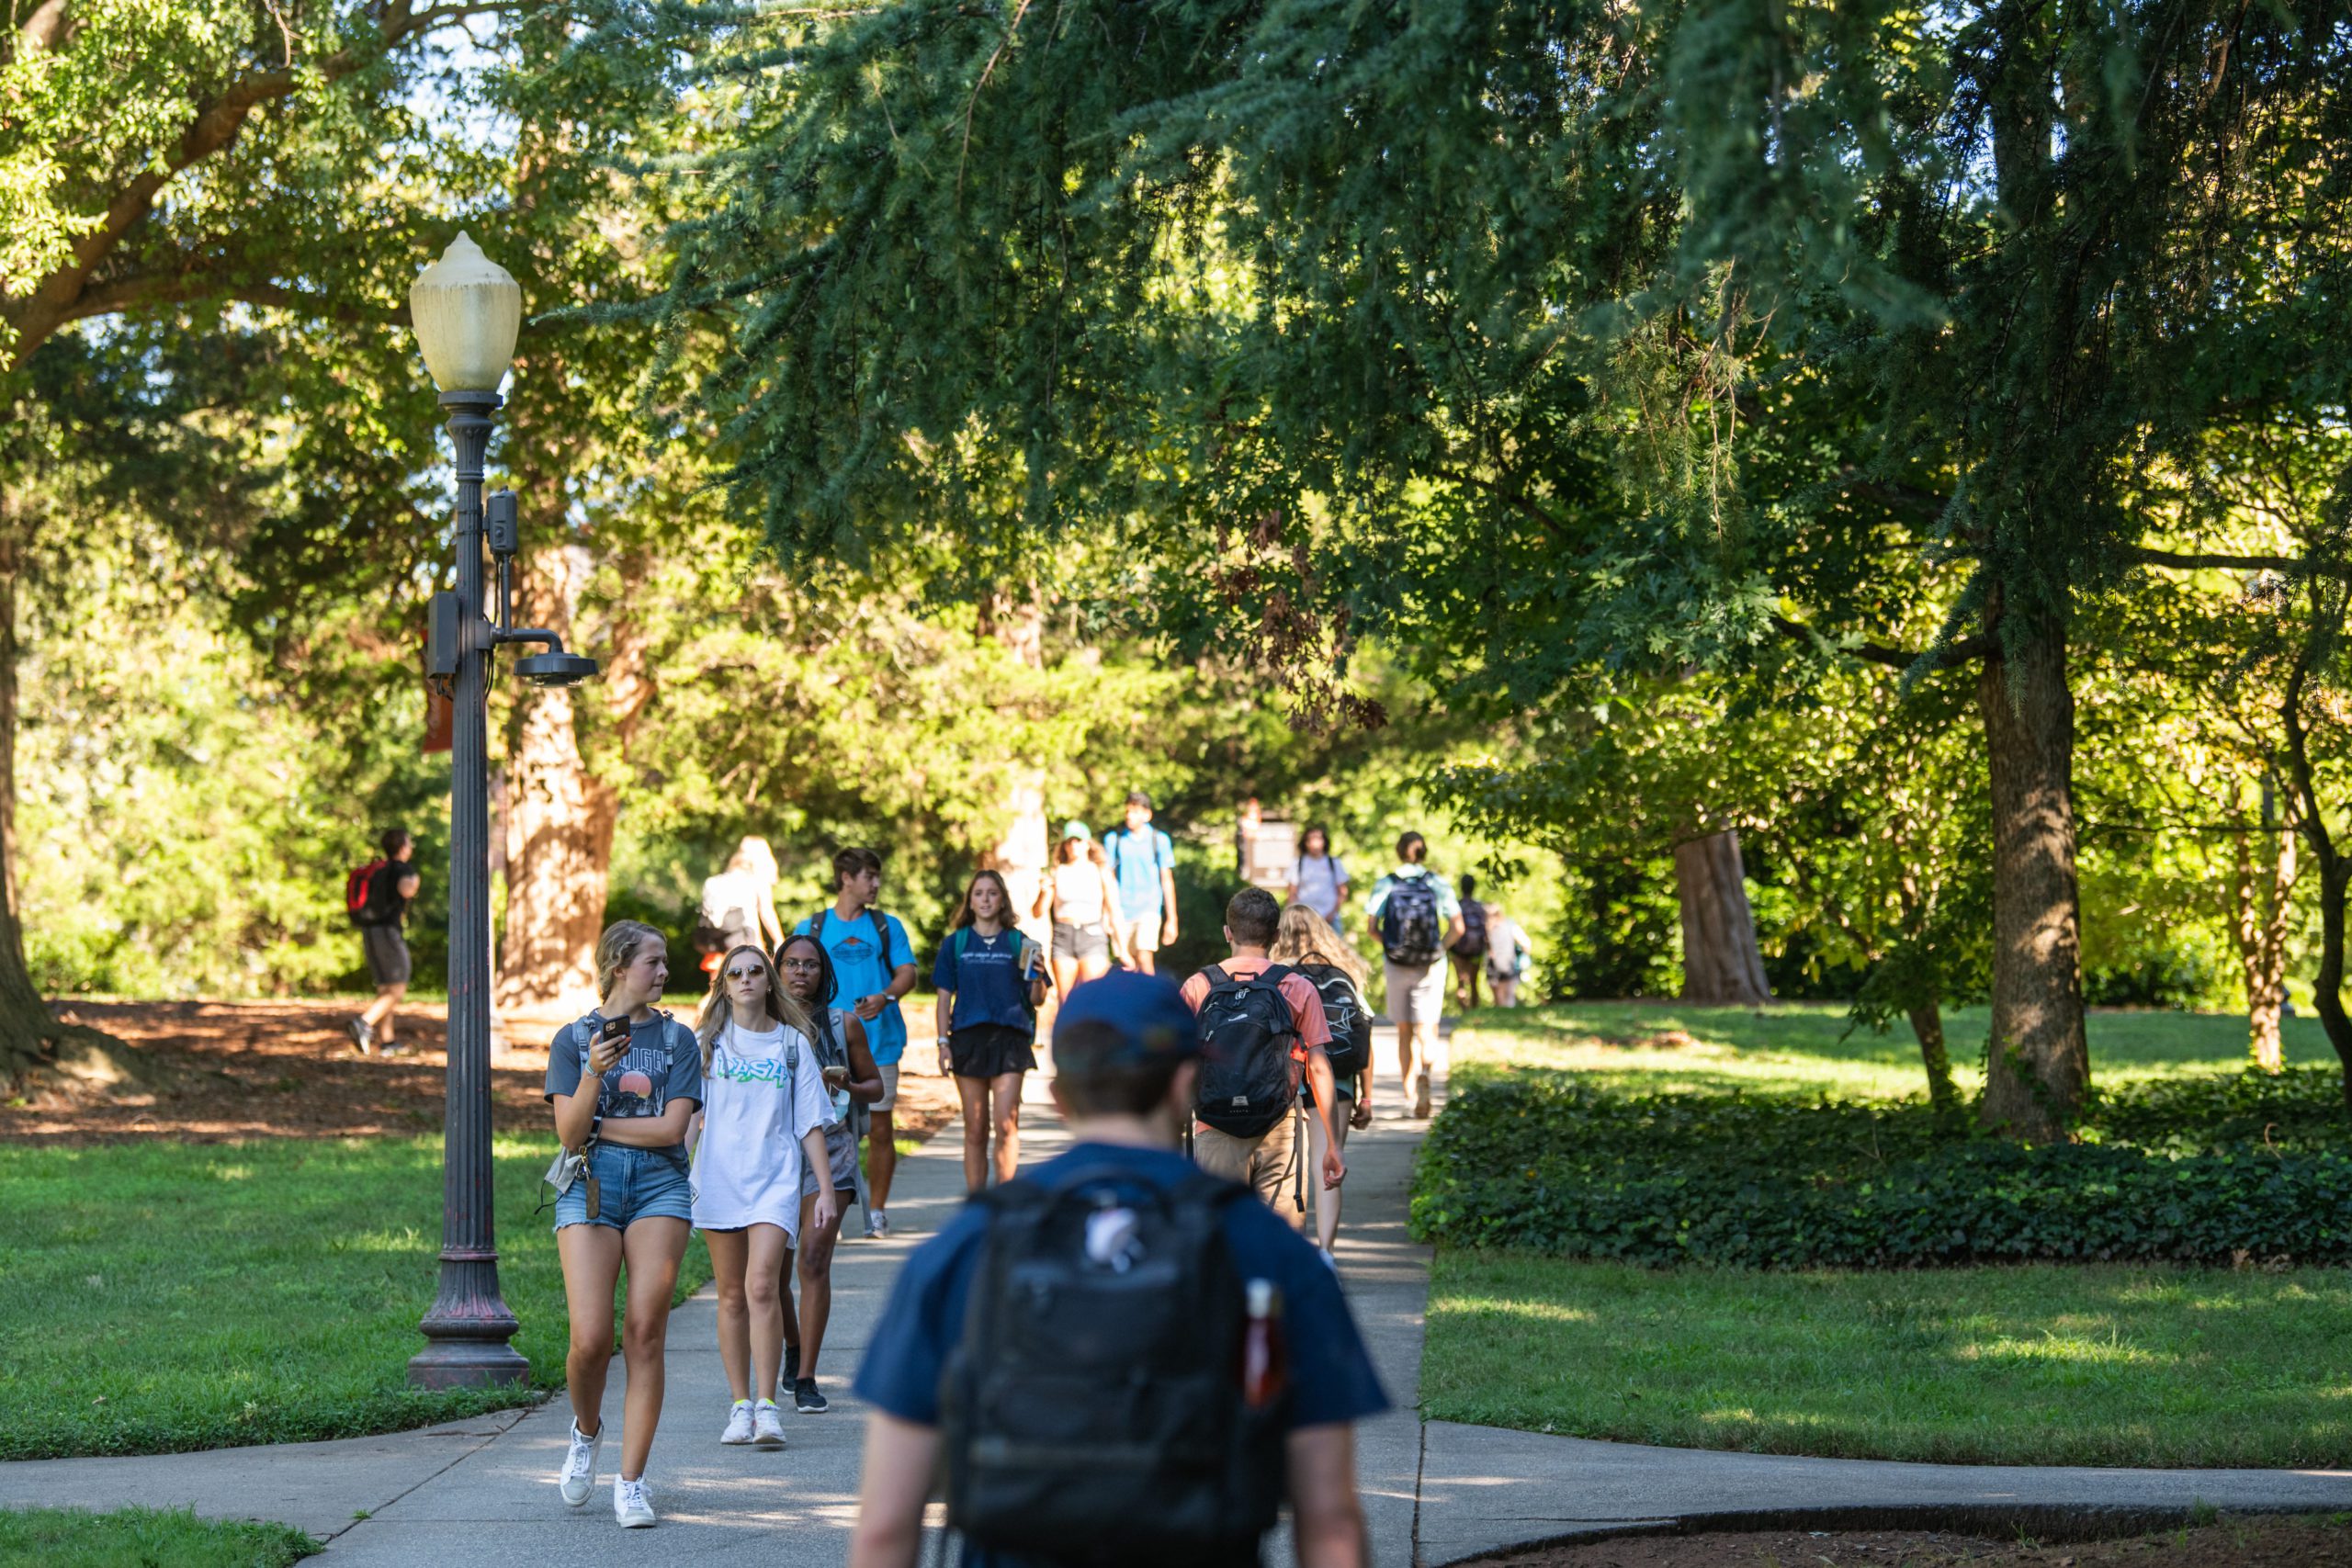 A group of students walk along a path among trees on the first day of class.